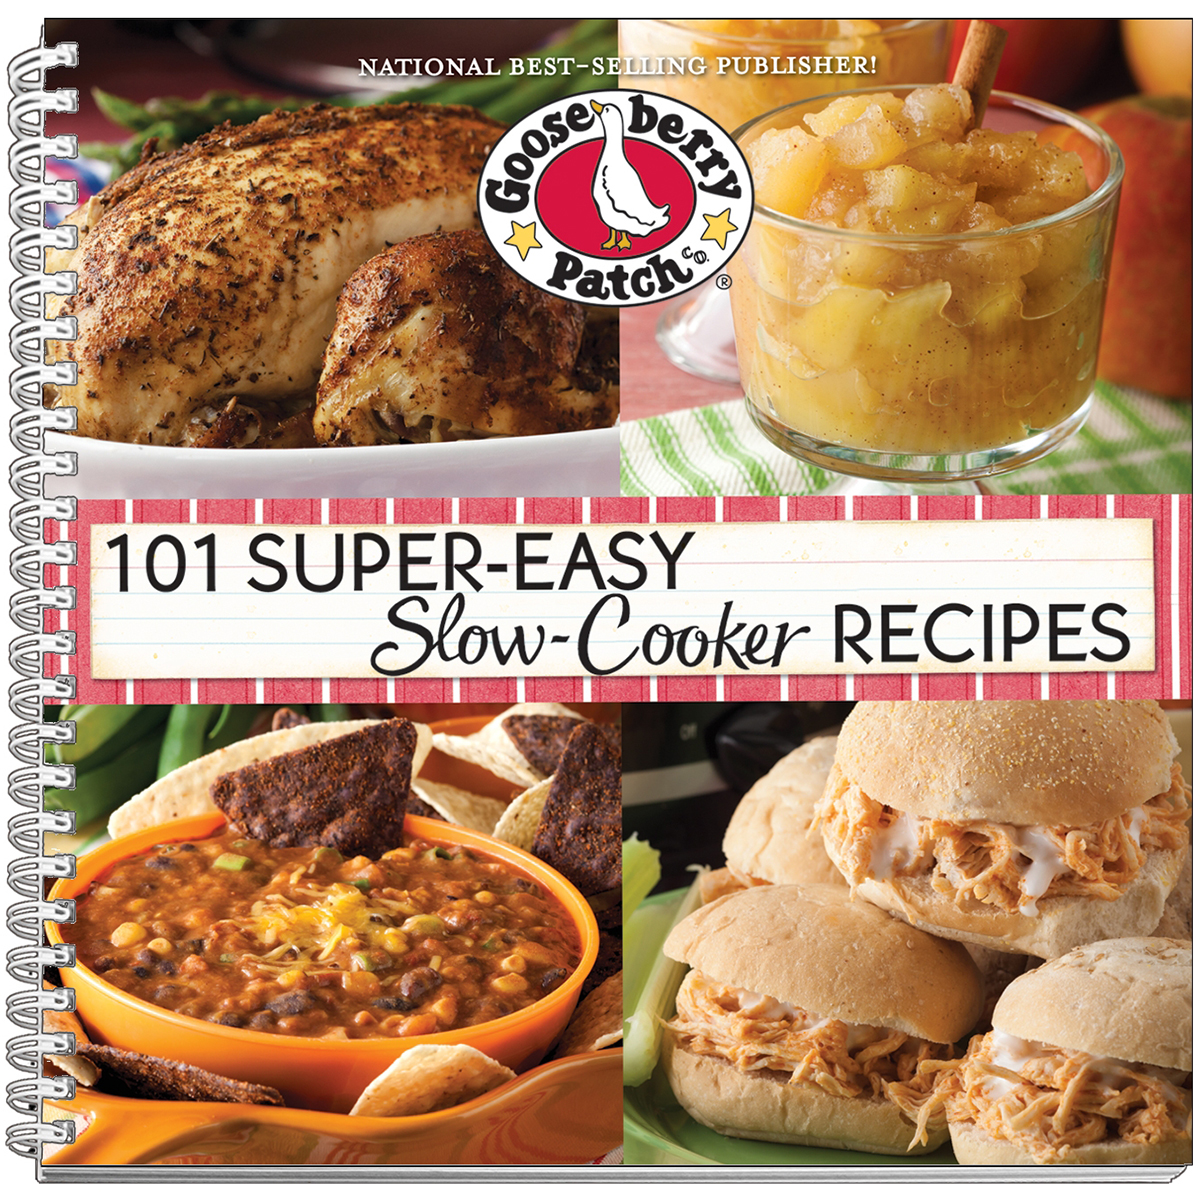 101 Super Easy Slow Cooker Recipes- - image 1 of 1